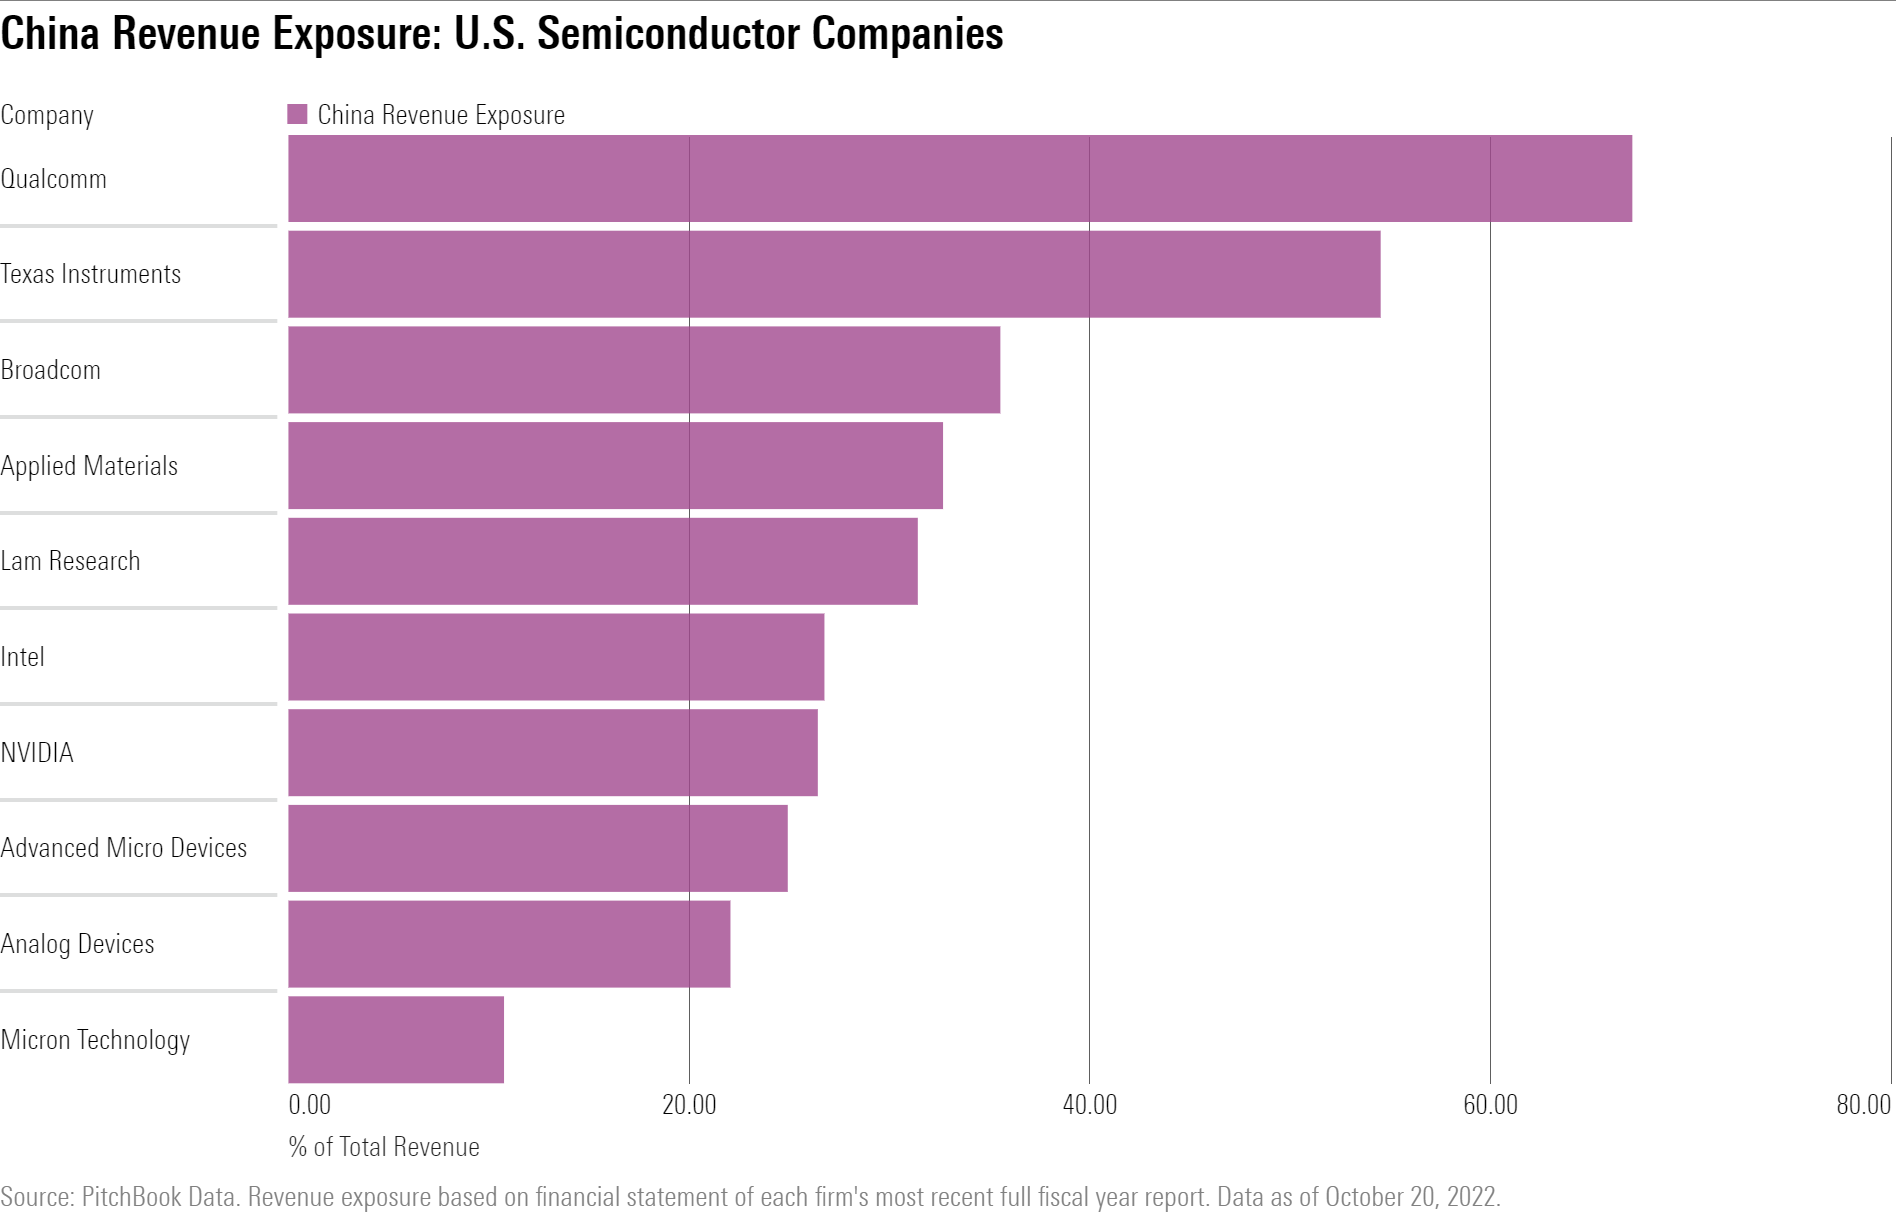 A horizontal bar chart showing the revenue exposure of US-listed semiconductor companies to China.